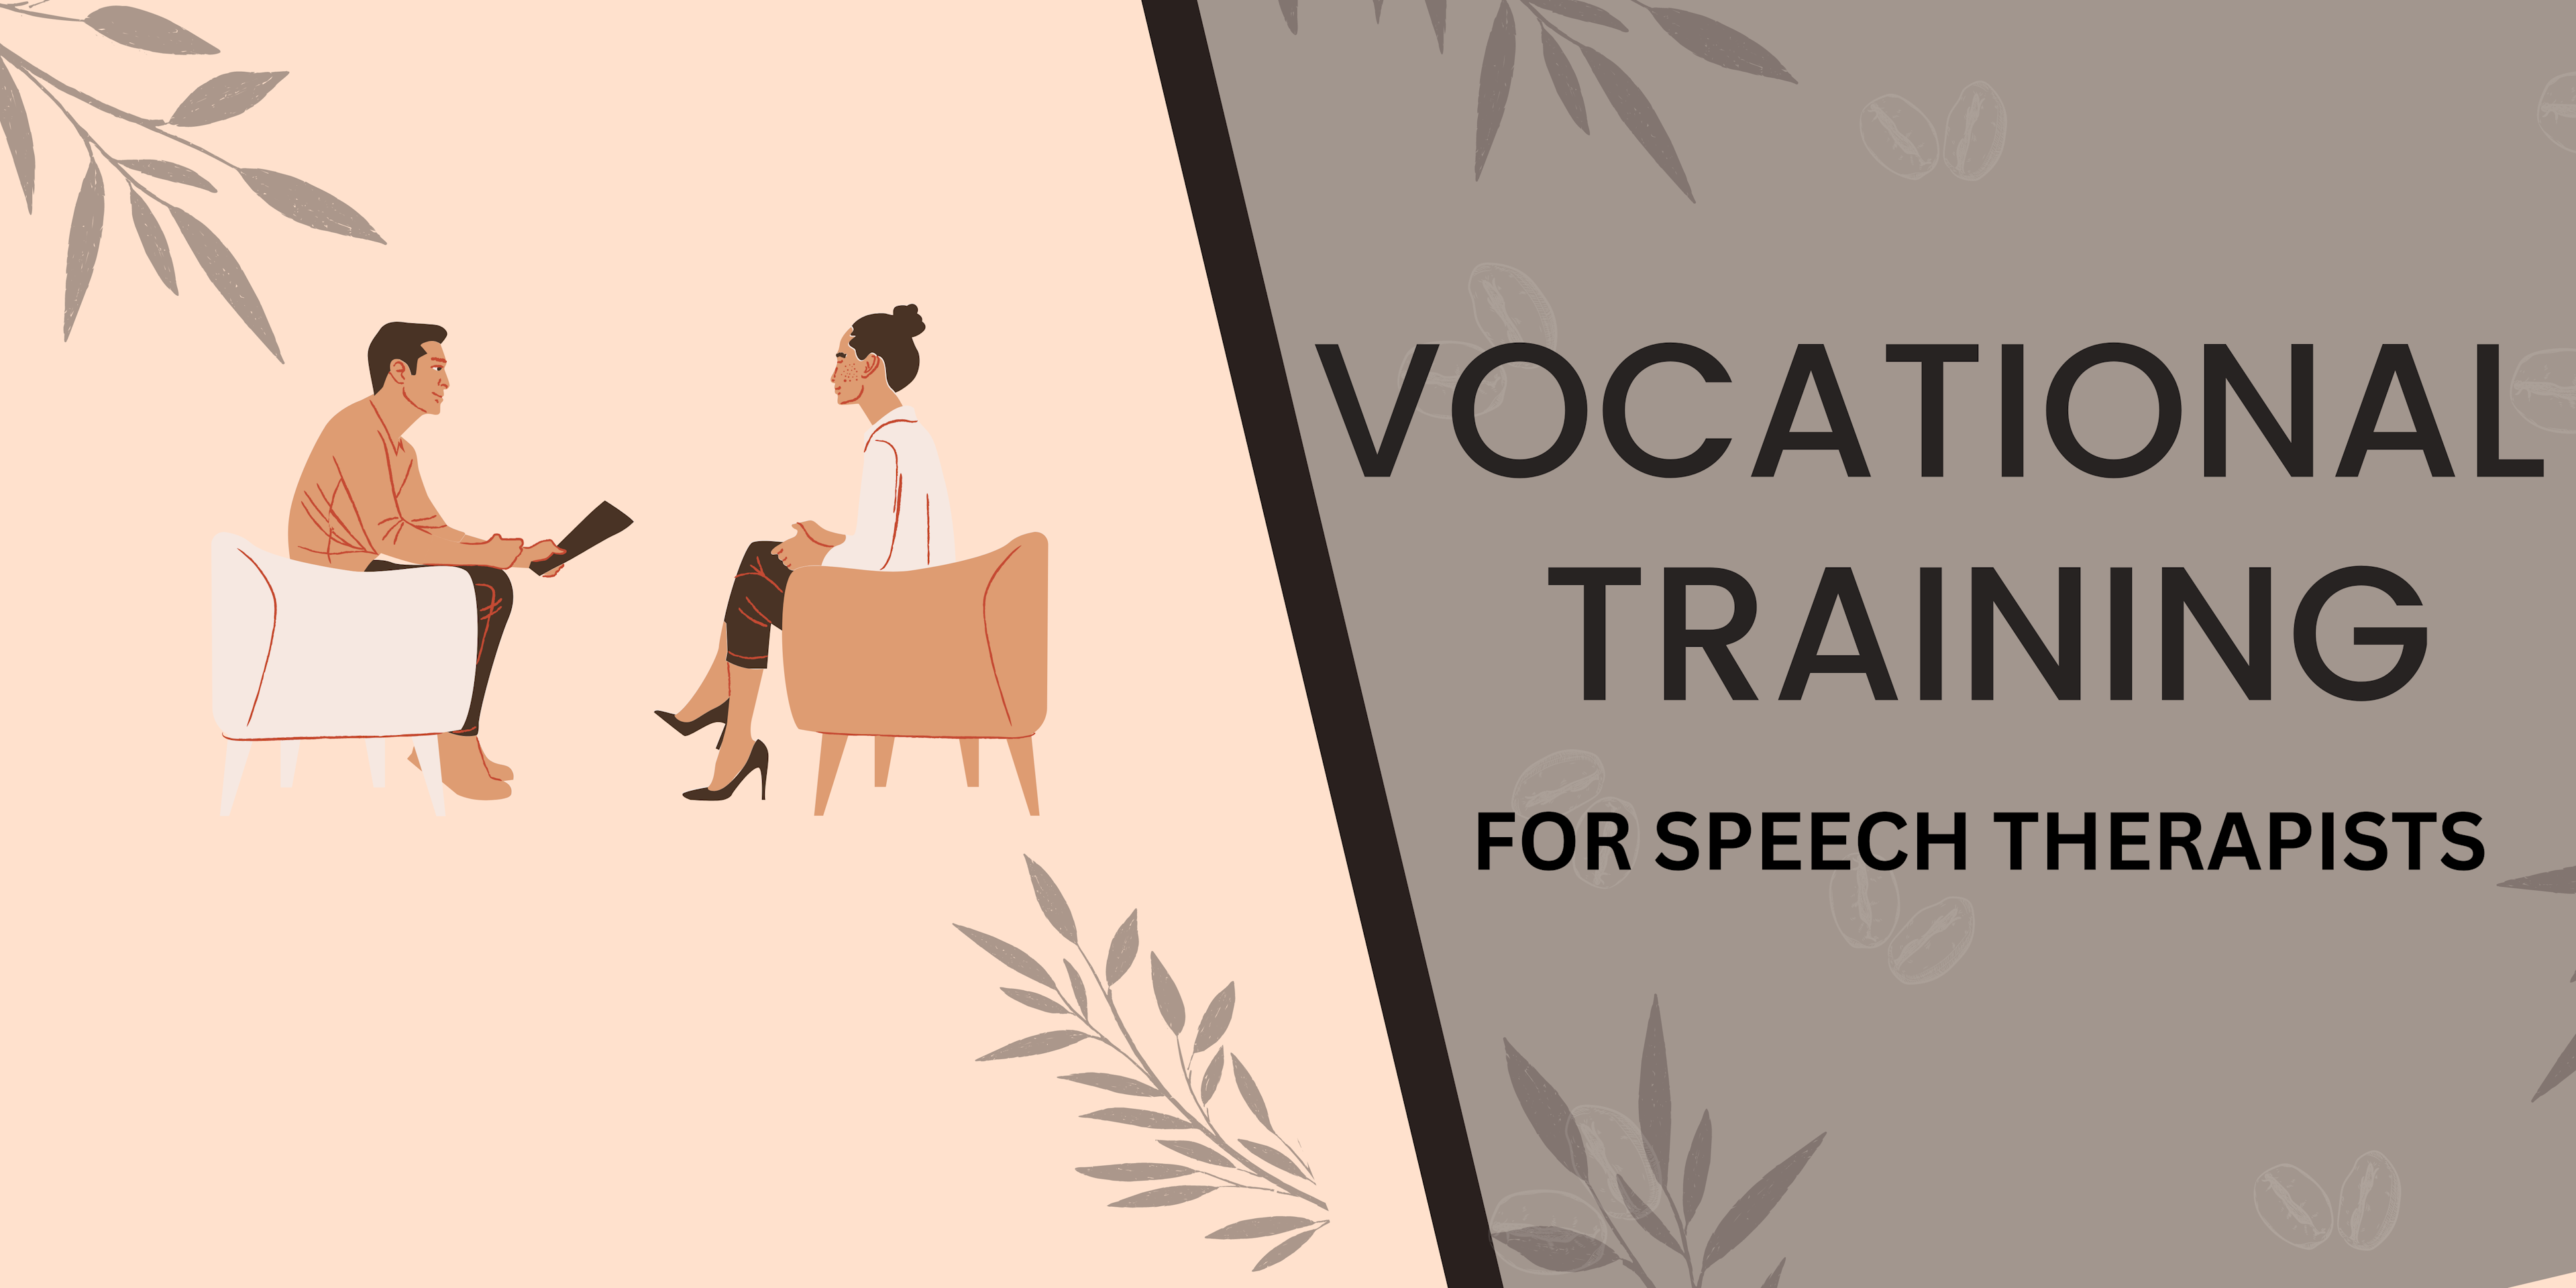 Tips to sharpen your speech therapy skills